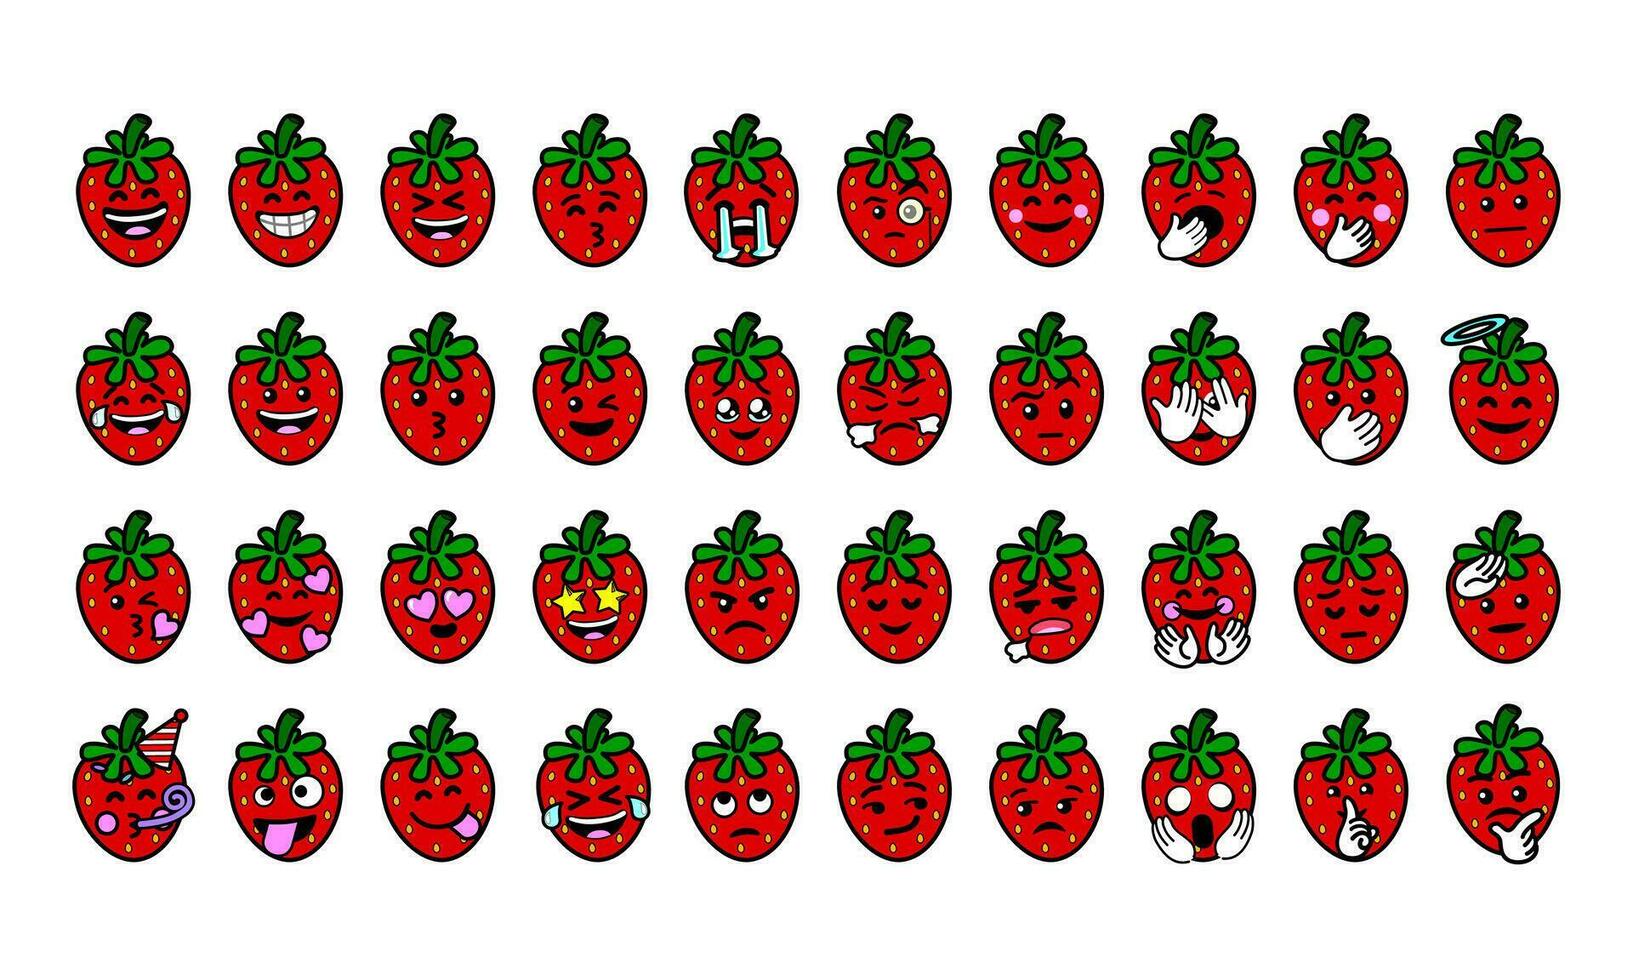 Strawberry collection of 40 expressive facial expressions vector